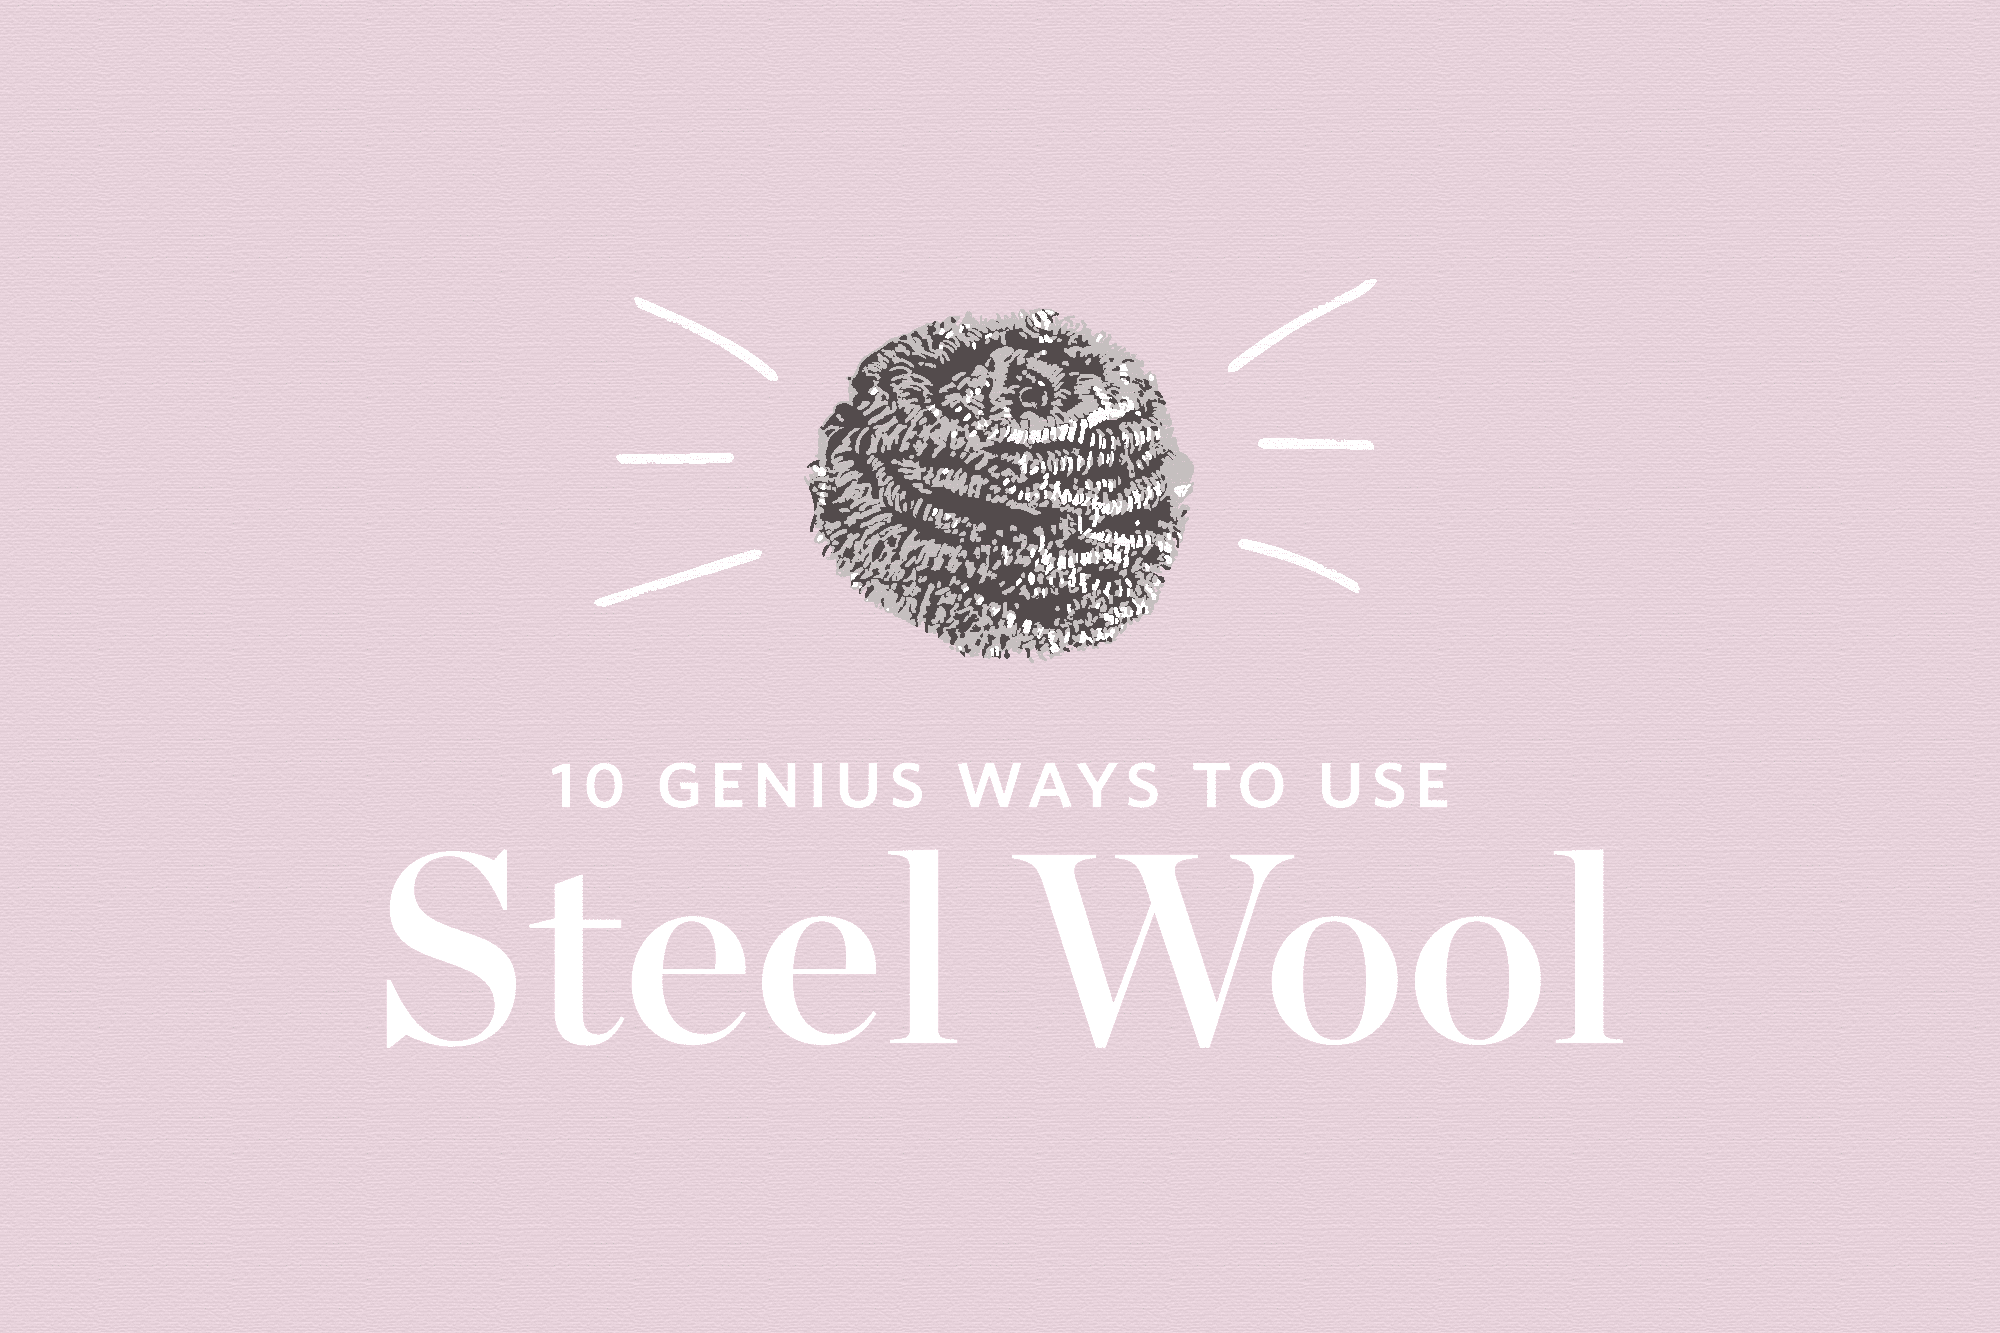 Is steel wool, the kind used for scrubbing pans, good enough? Or